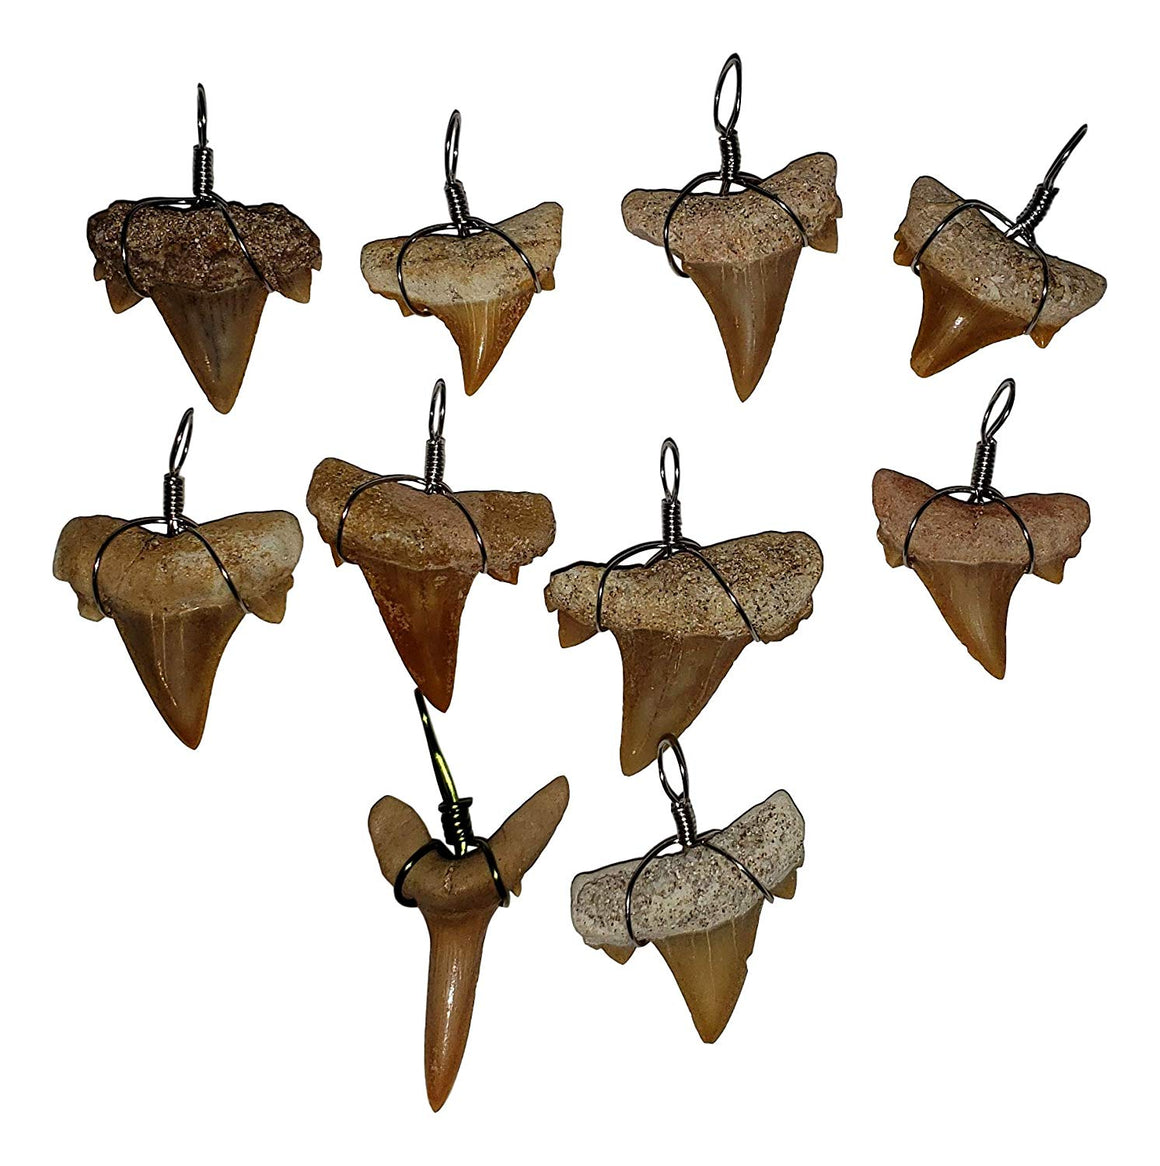 Make-Your-Own Fossil Shark Tooth Necklace Kits - Set of 10 - dinosaursrocksuperstore